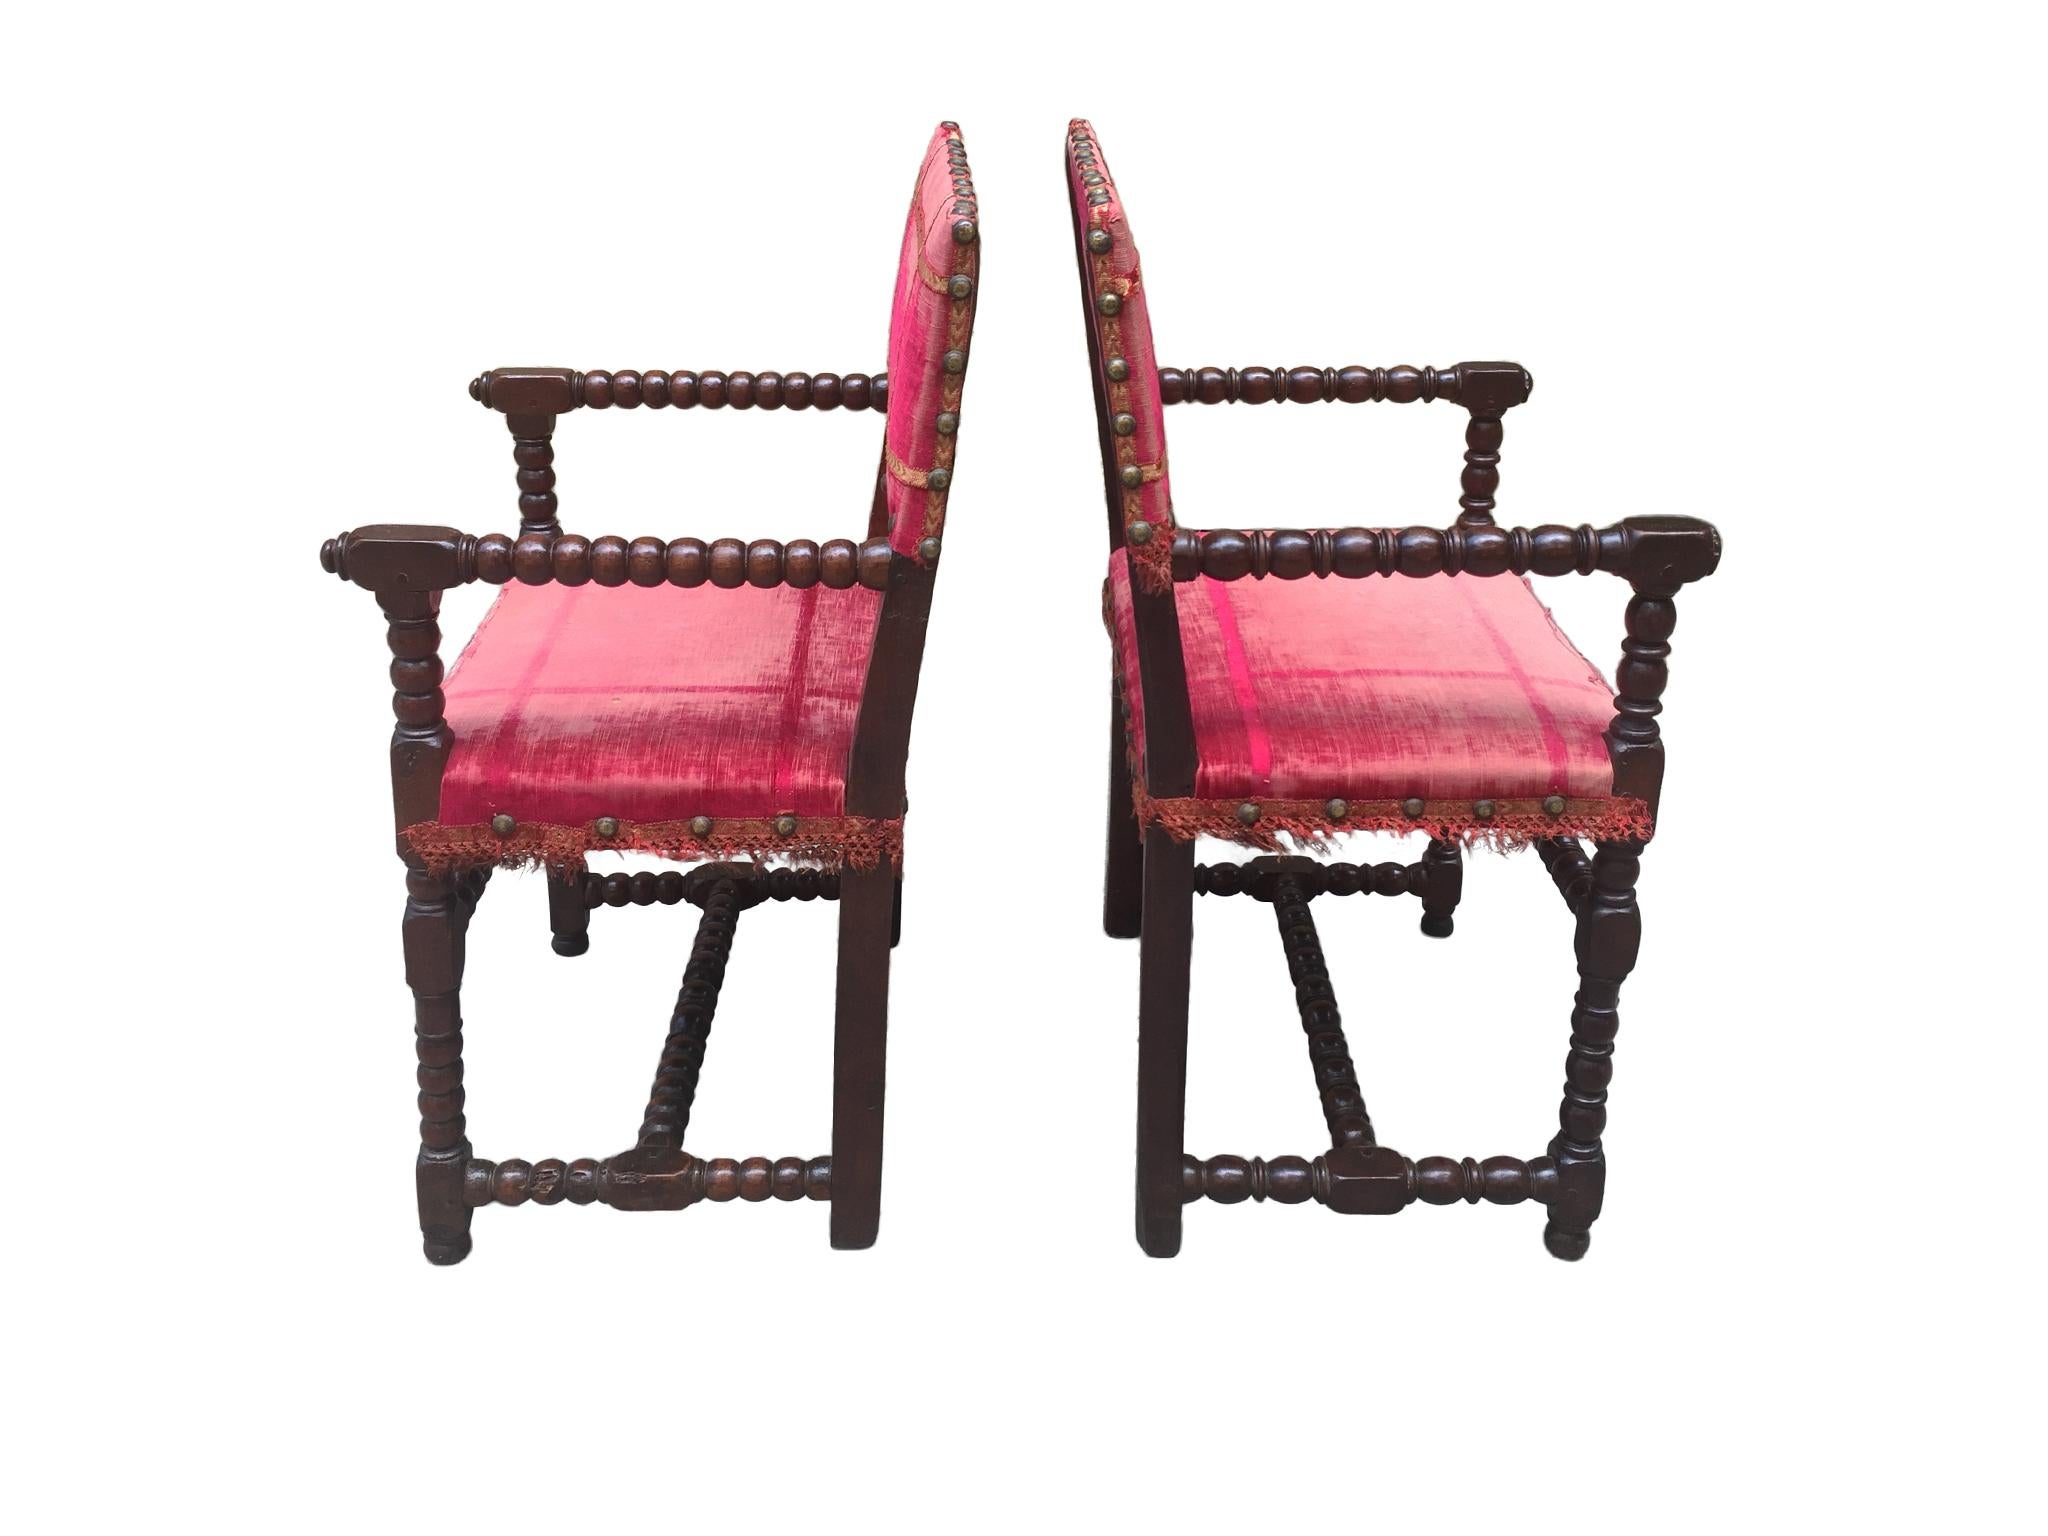 19th Century Antique Baroque-Style Walnut and Velvet Armchairs, a Set of 2